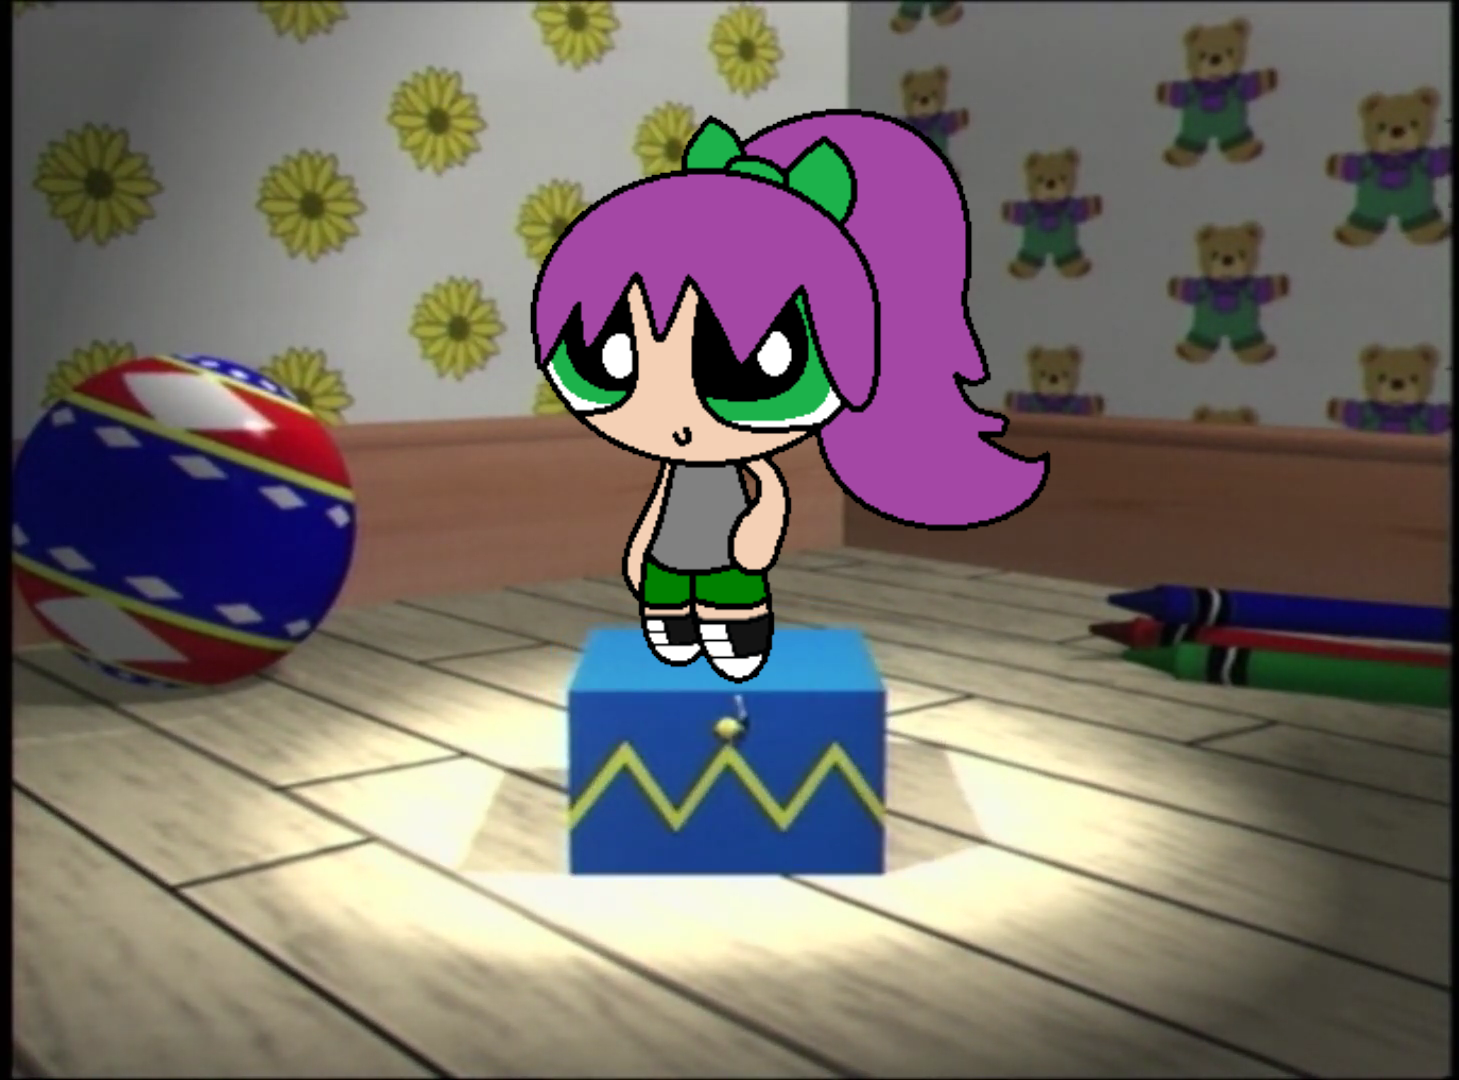 Paige standing on the Box in the Tempo Pre-School logo Blank Meme Template